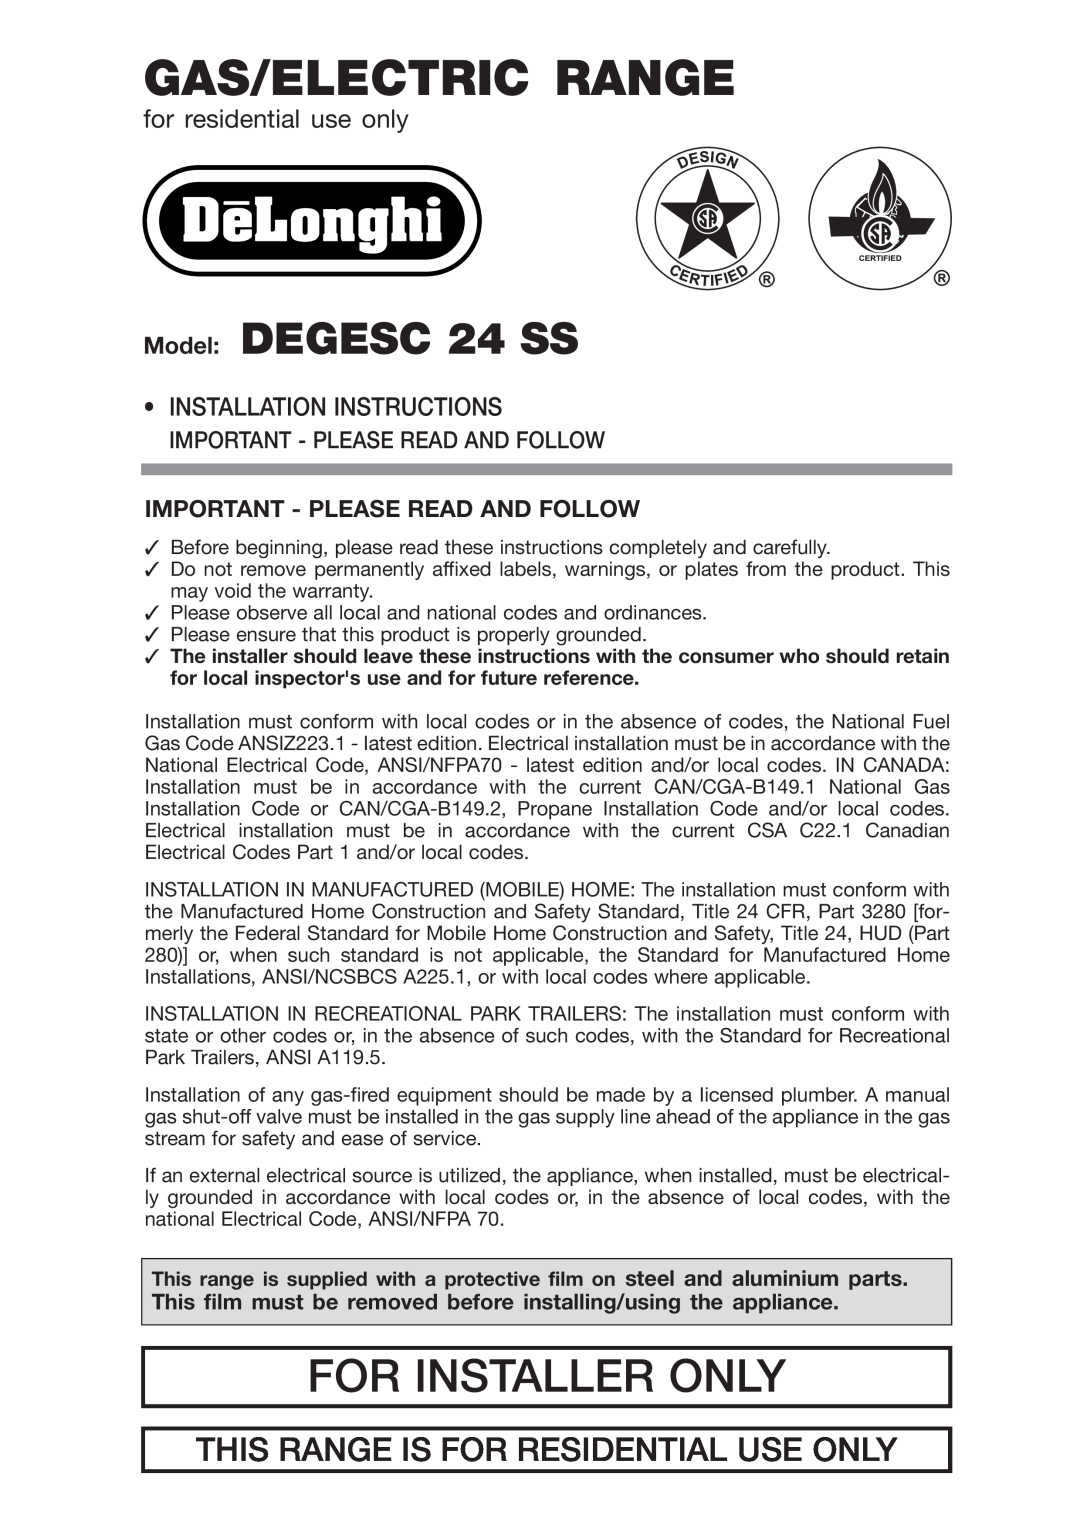 DeLonghi DEGESC24SS installation instructions Important - Please Read And Follow, Gas/Electric Range, For Installer Only 